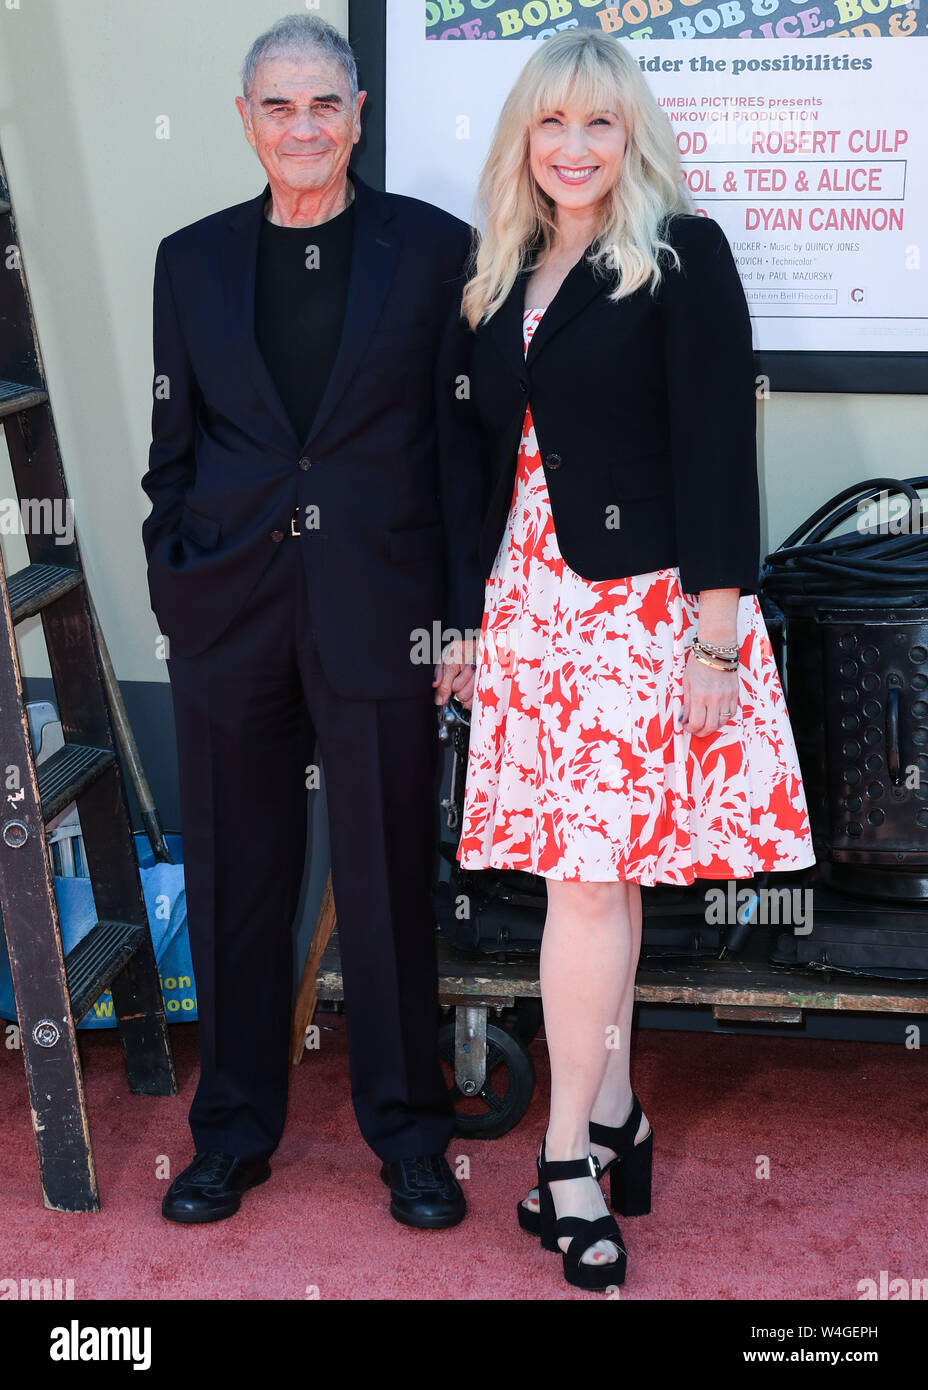 HOLLYWOOD, LOS ANGELES, CALIFORNIA, USA - JULY 22: Robert Forster and Evie Forster arrive at the World Premiere Of Sony Pictures' 'Once Upon a Time In Hollywood' held at the TCL Chinese Theatre IMAX on July 22, 2019 in Hollywood, Los Angeles, California, United States. (Photo by Xavier Collin/Image Press Agency) Stock Photo